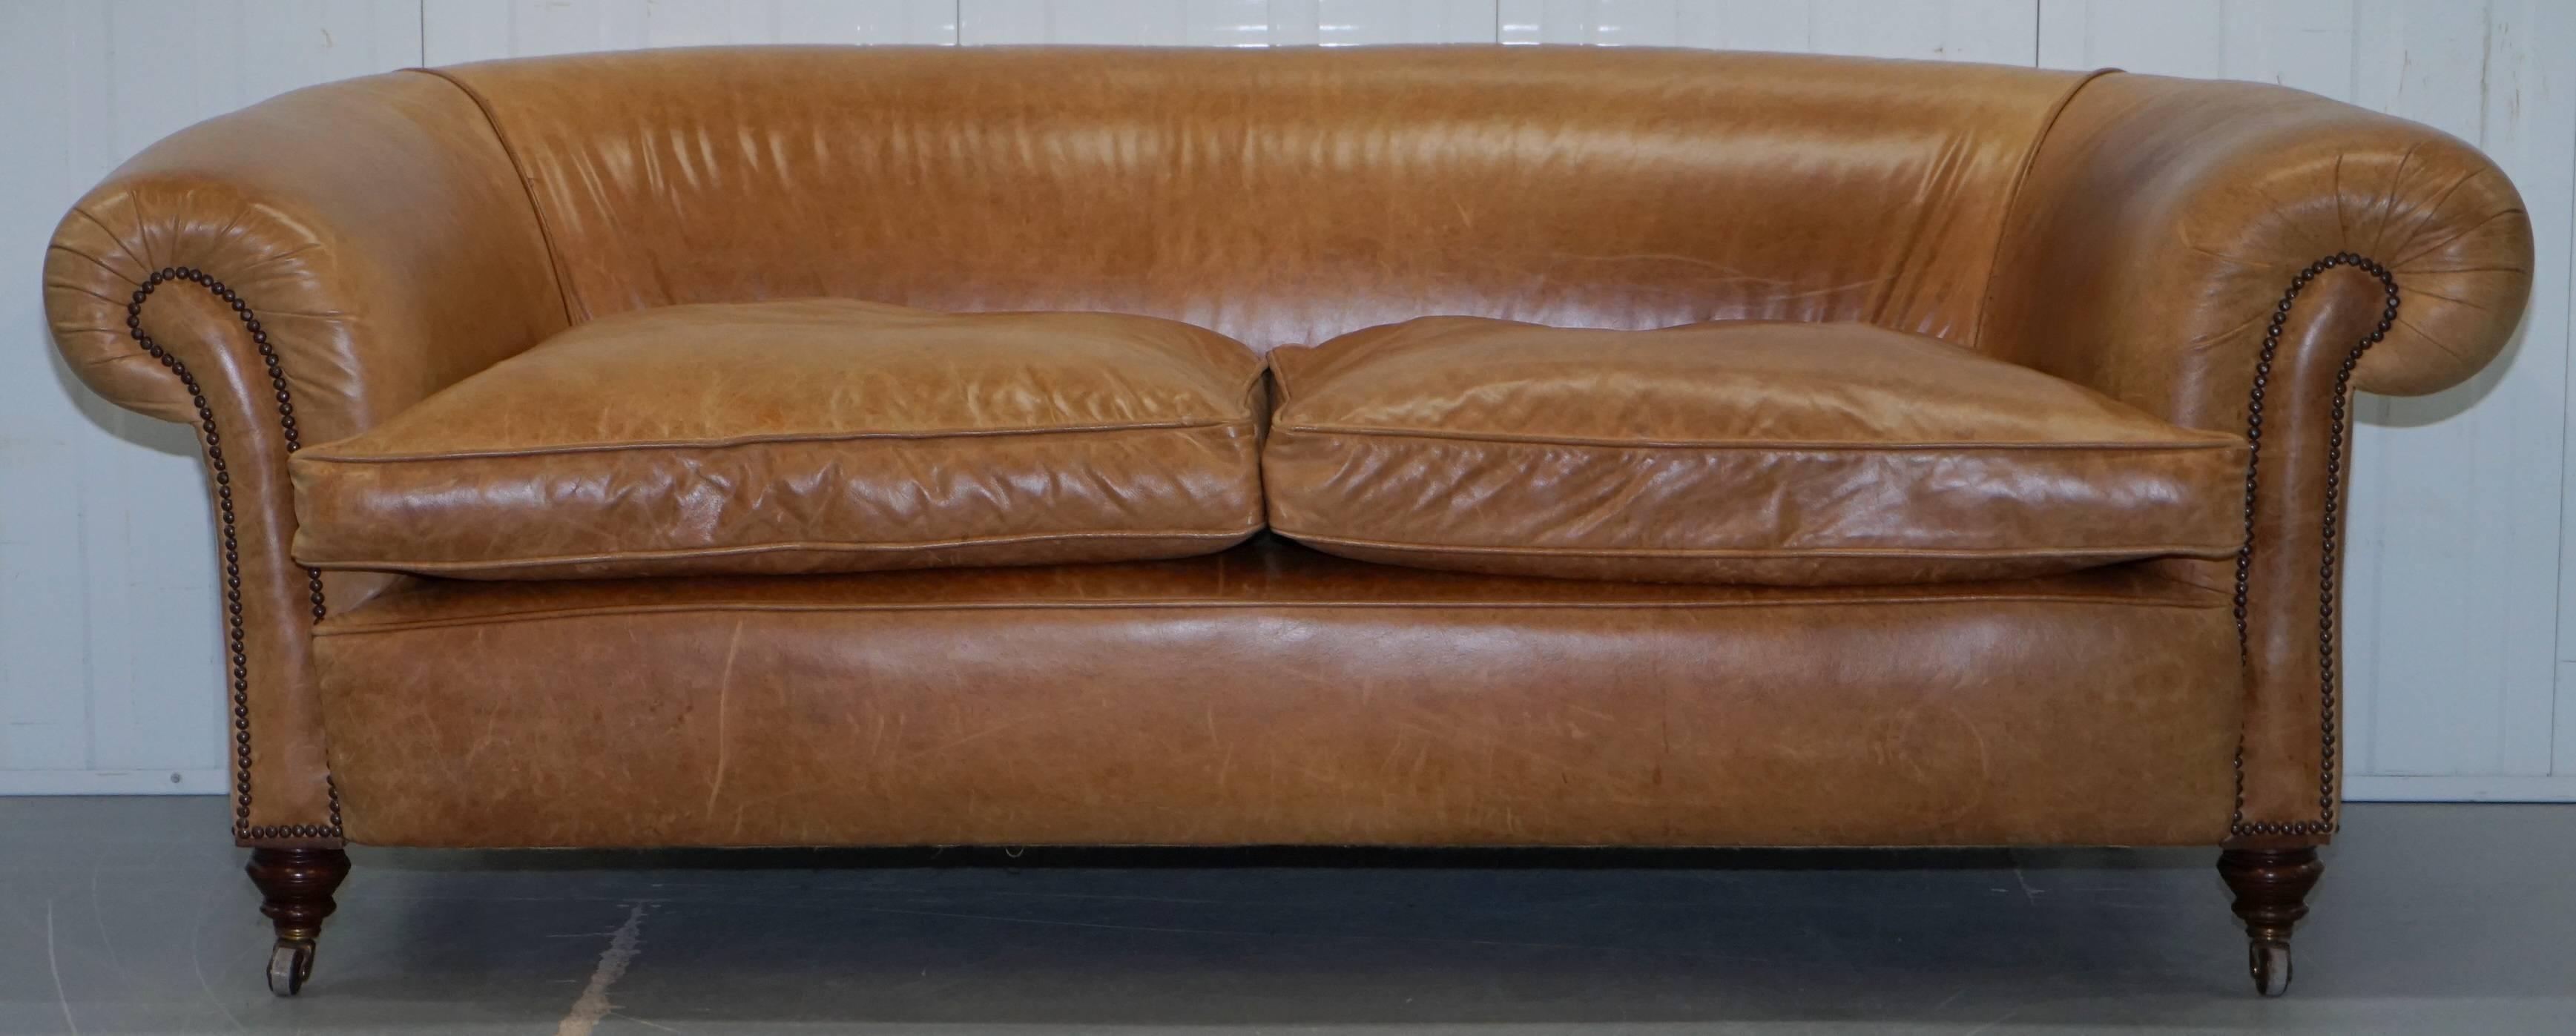 We are delighted to offer for sale 1 of 2 lovely restored Victorian club sofas with inside back leg stamped

This auction is for the original Victorian model, the owners had a second sofa made to match it in or circa 1930s, this second sofa looks